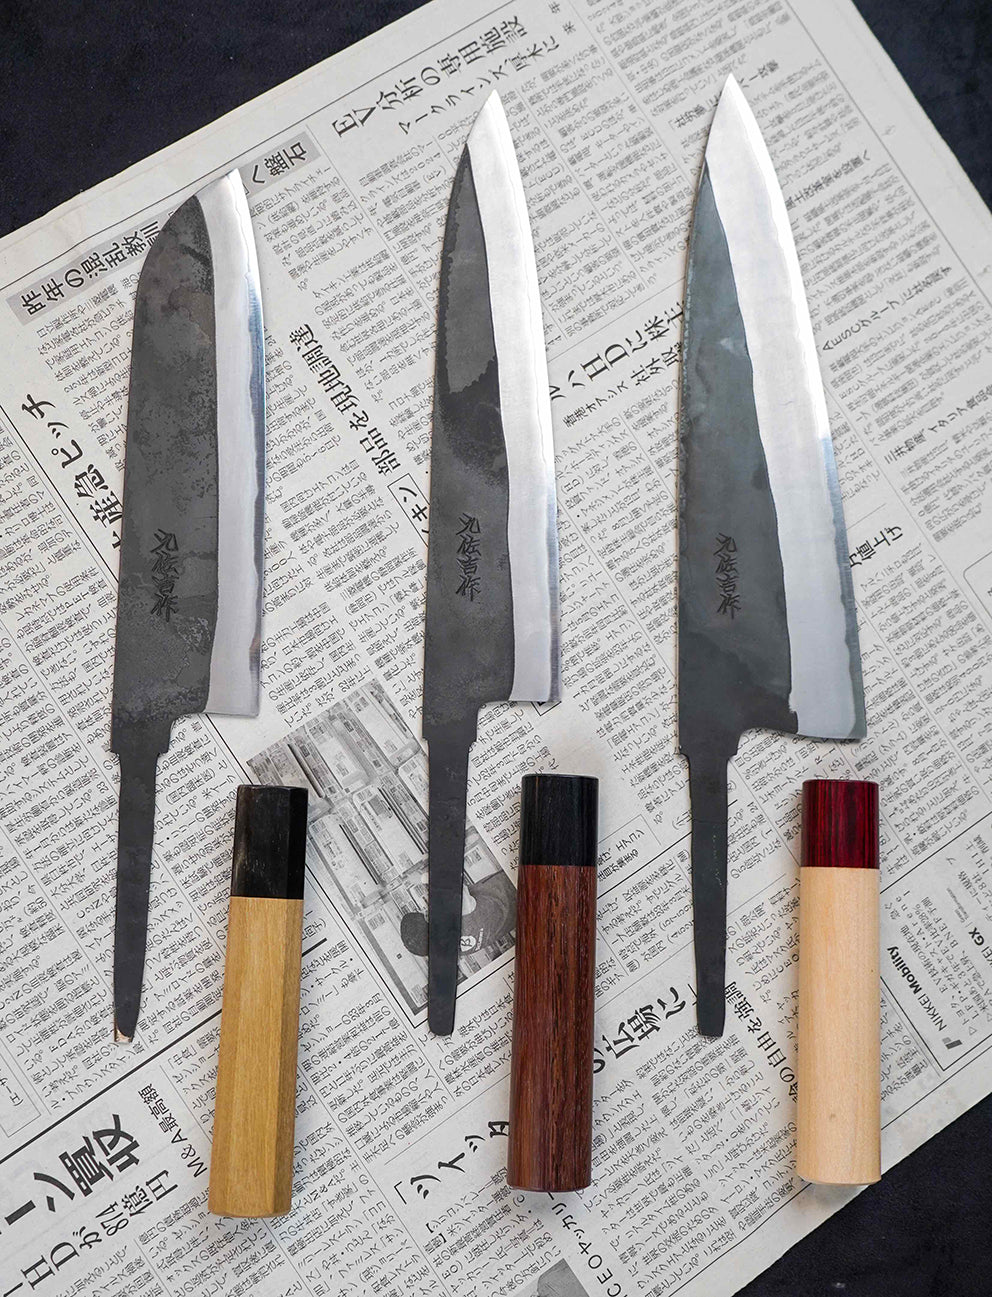 Hone your knowledge of Japanese kitchen knives - The Japan Times